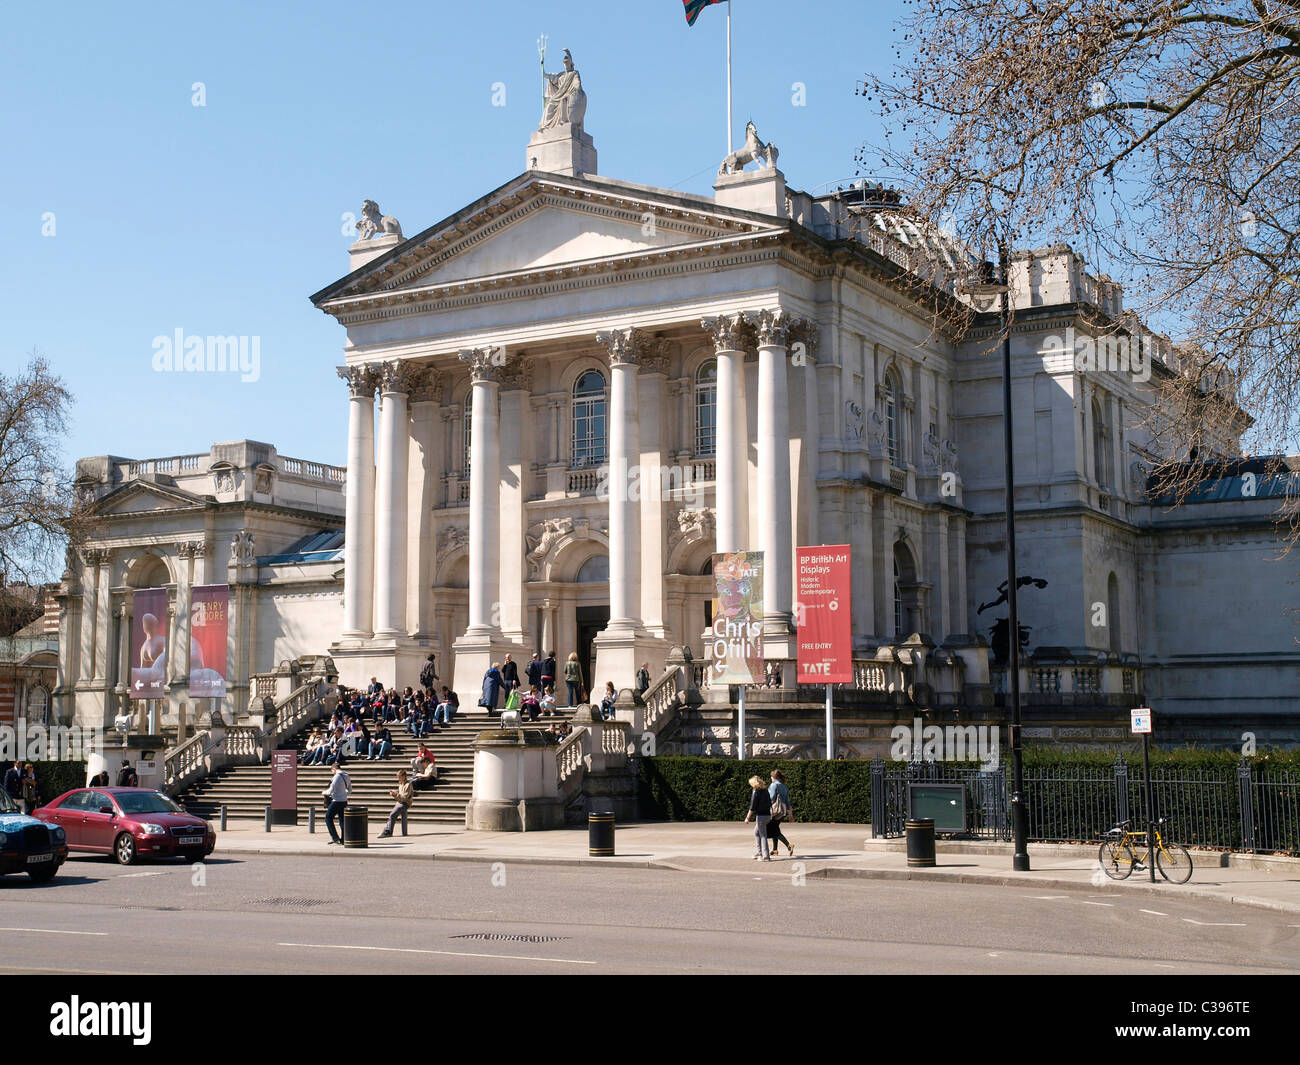 The Tate Britain art gallery for British art from 1500 to the present day. Millbank London England Stock Photo